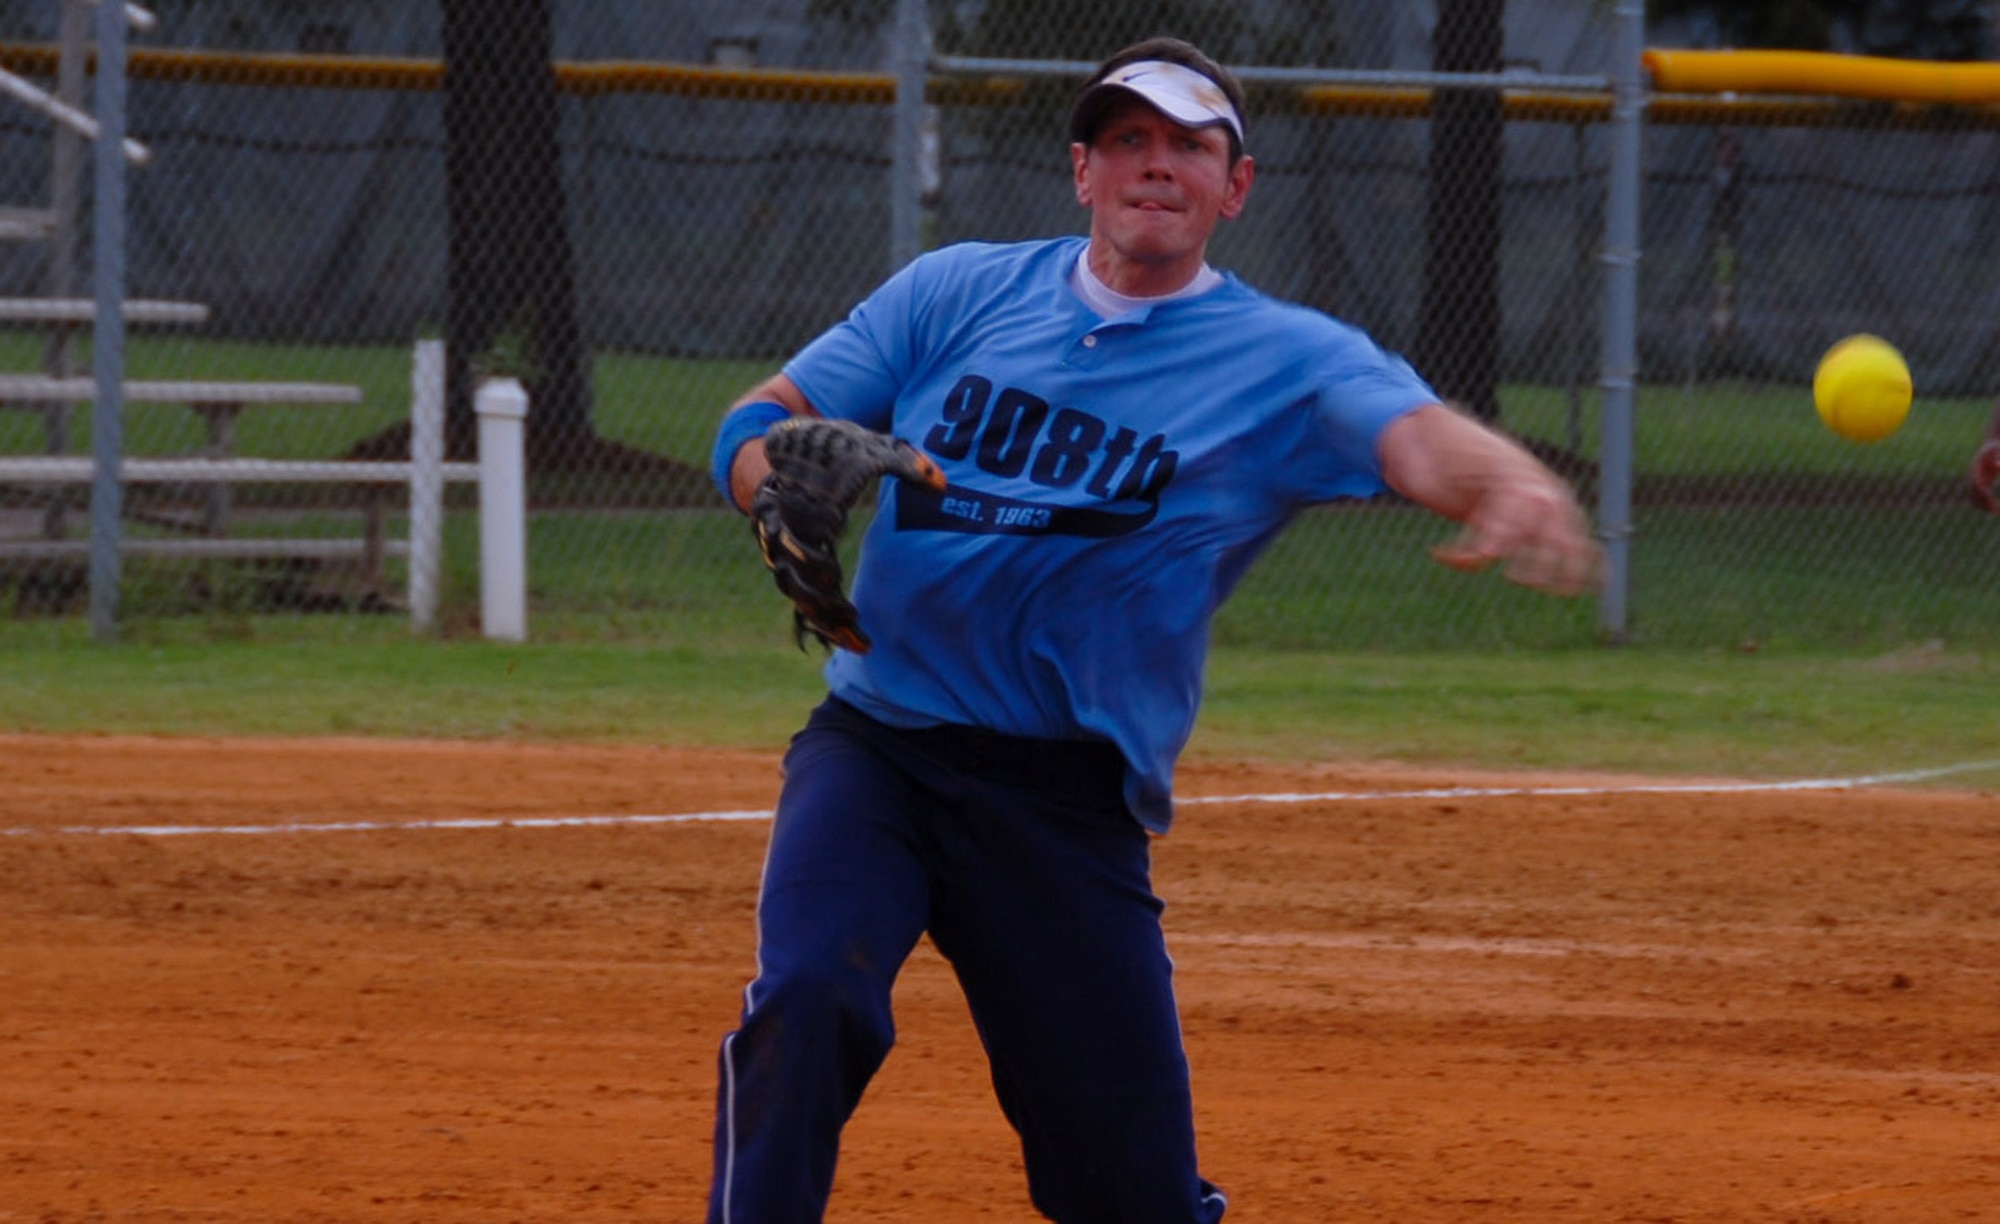 Master Sgt. Mark Naglic from the 908th Airlift Wing was the winning pitcher of both games during the Maxwell-Gunter intramural softball championship July 30. The 908th won the championship game against the Electronic Systems Group to capture the title. (U.S. Air Force photo/Jamie Pitcher)